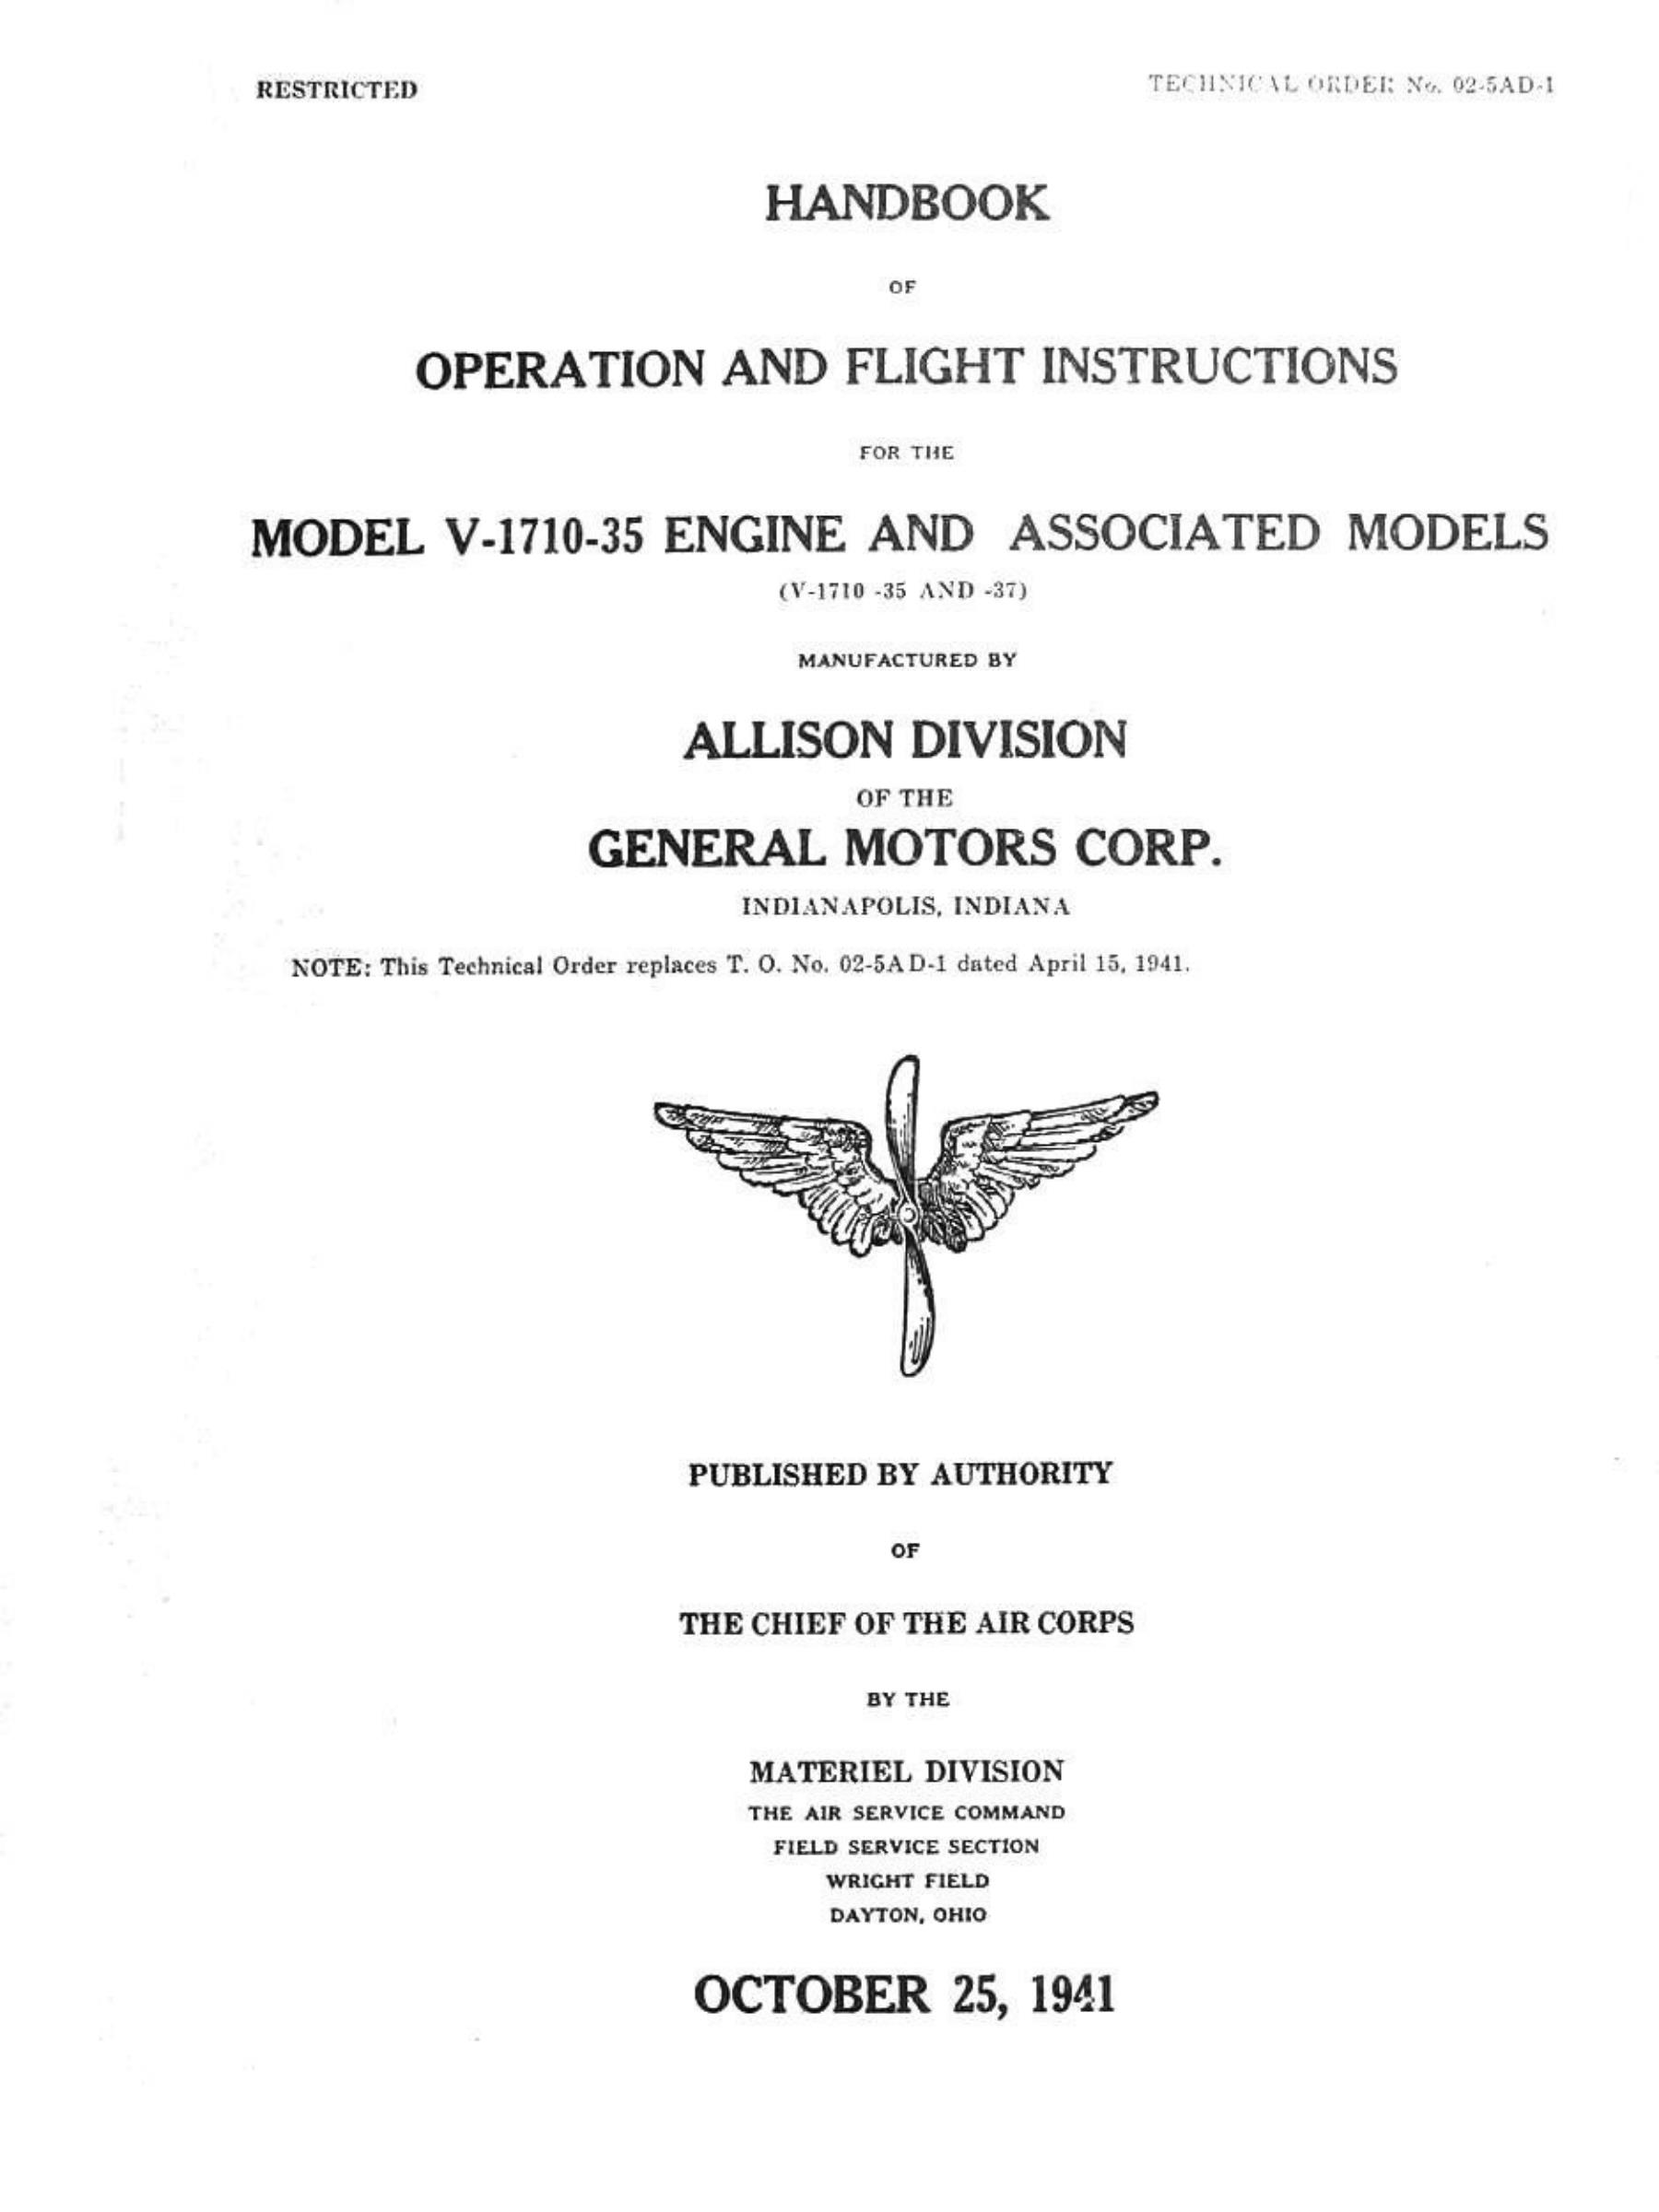 Sample page 1 from AirCorps Library document: Op and Flight Inst for the Model V-1710-35 Engine and Associated Models